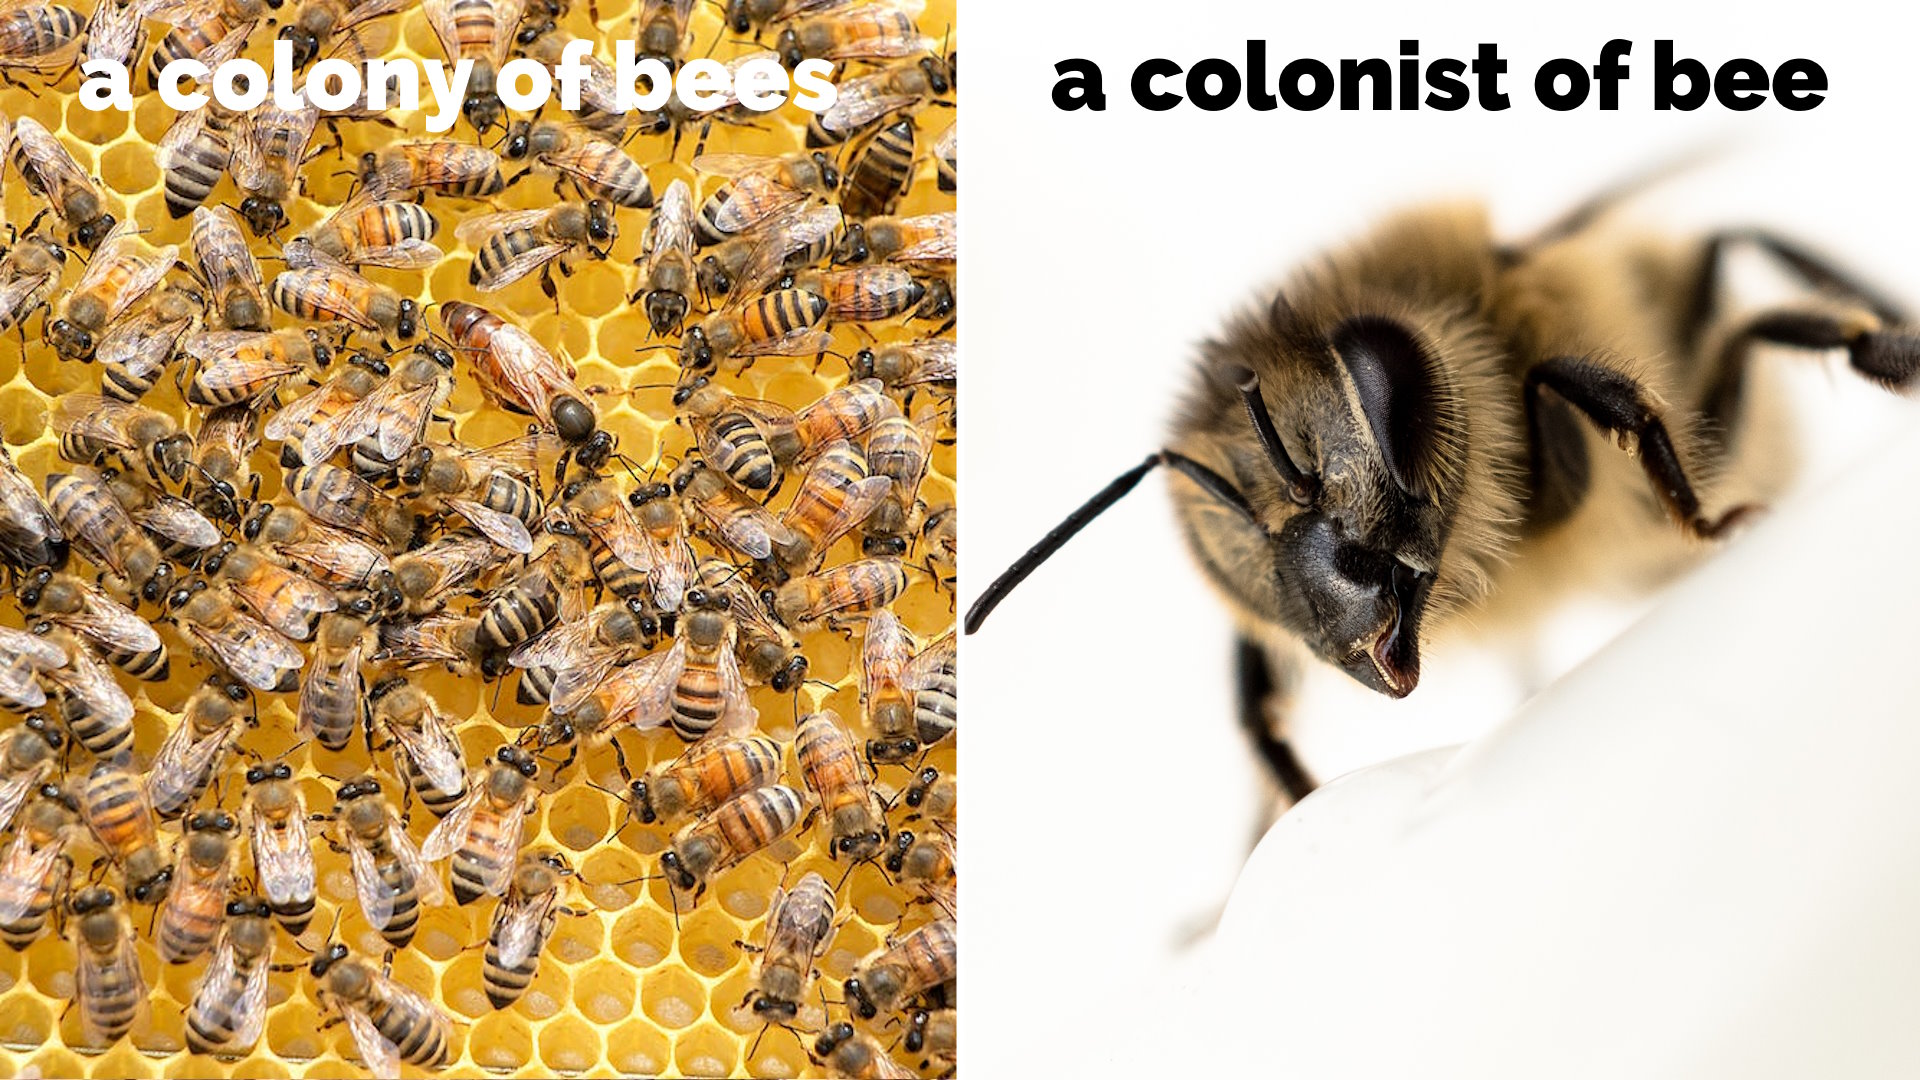 Captioned photos showing "a COLONY of BEES" and "a COLONIST of BEE".